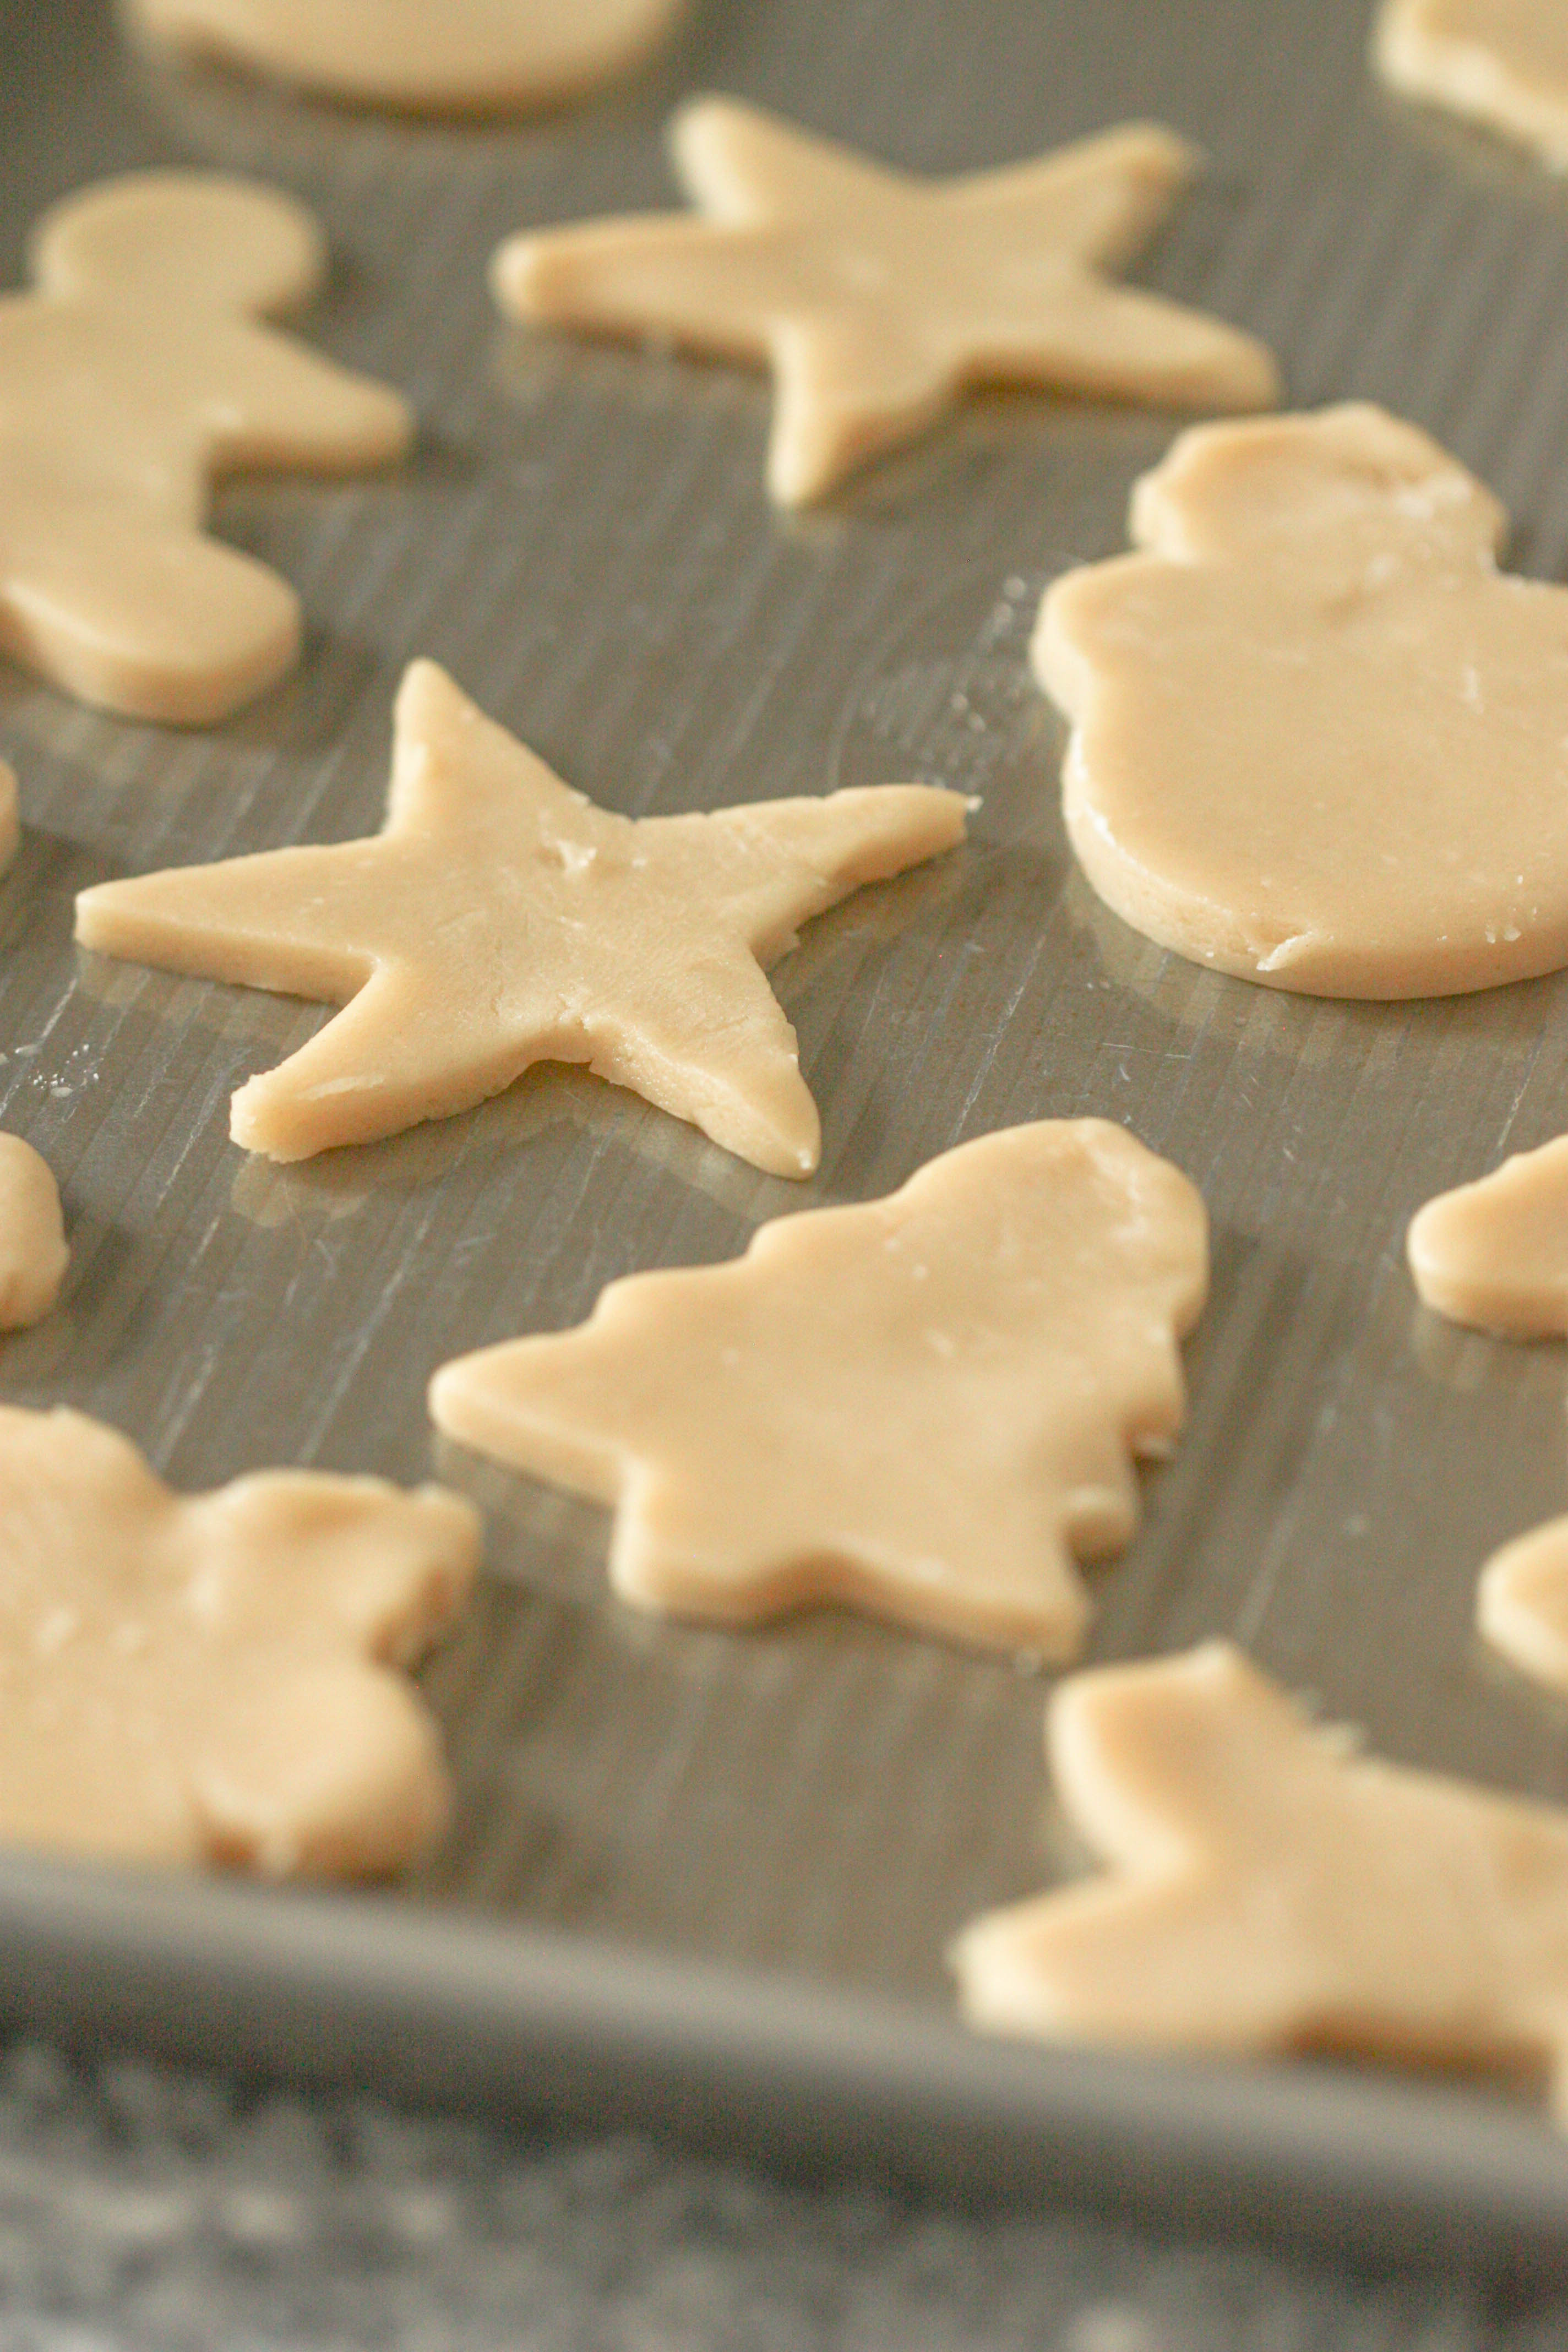 Sugar Cookie shapes on a baking sheet